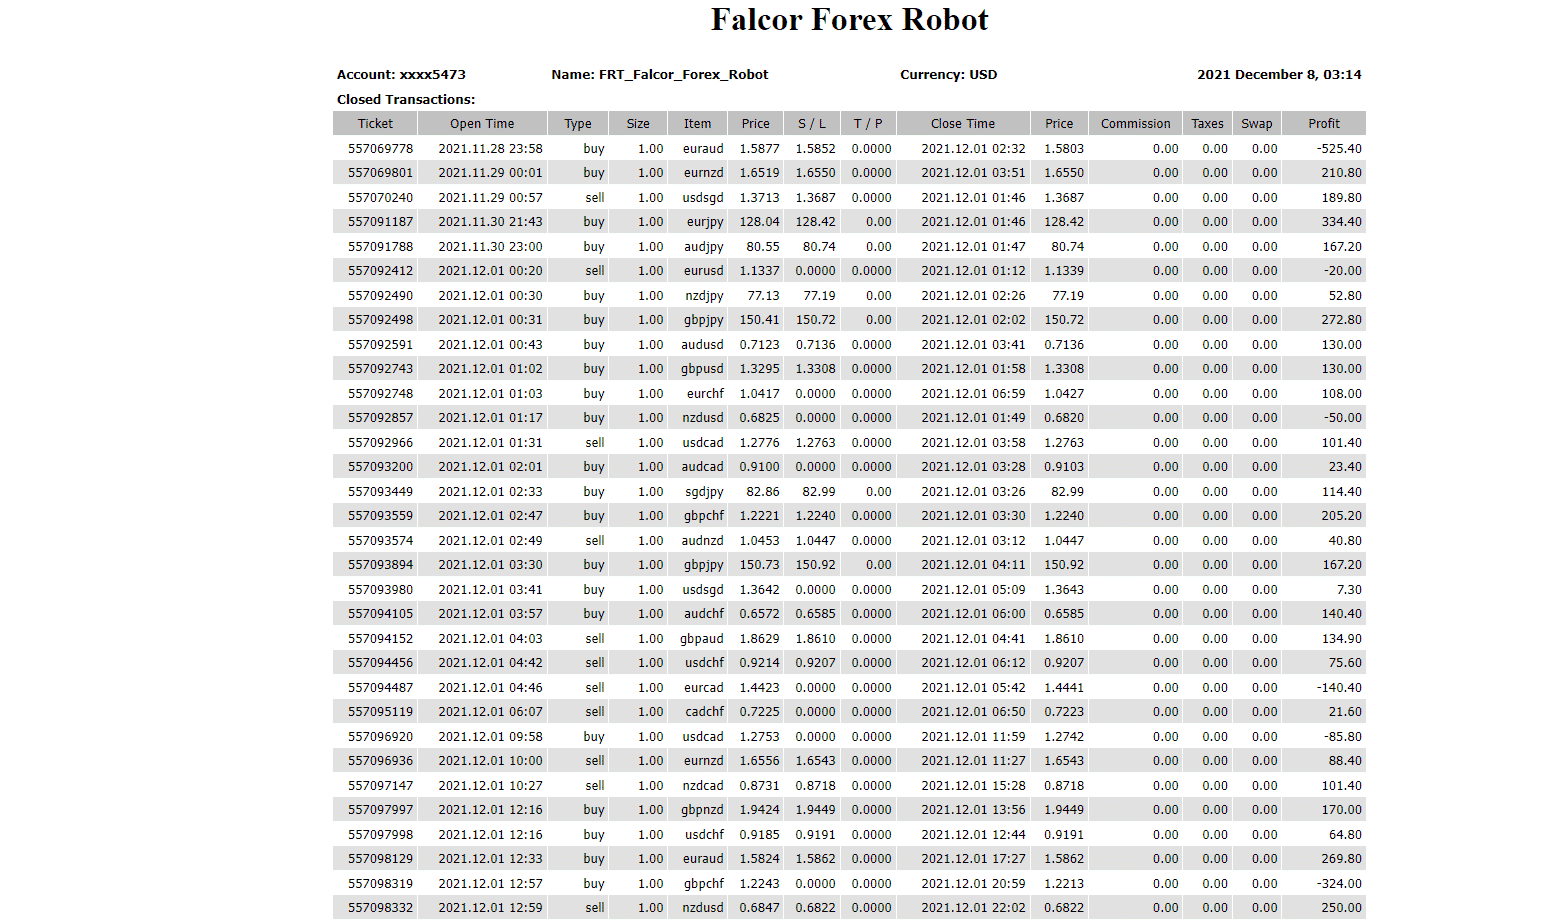 Trading results of Falcor Forex Robot.